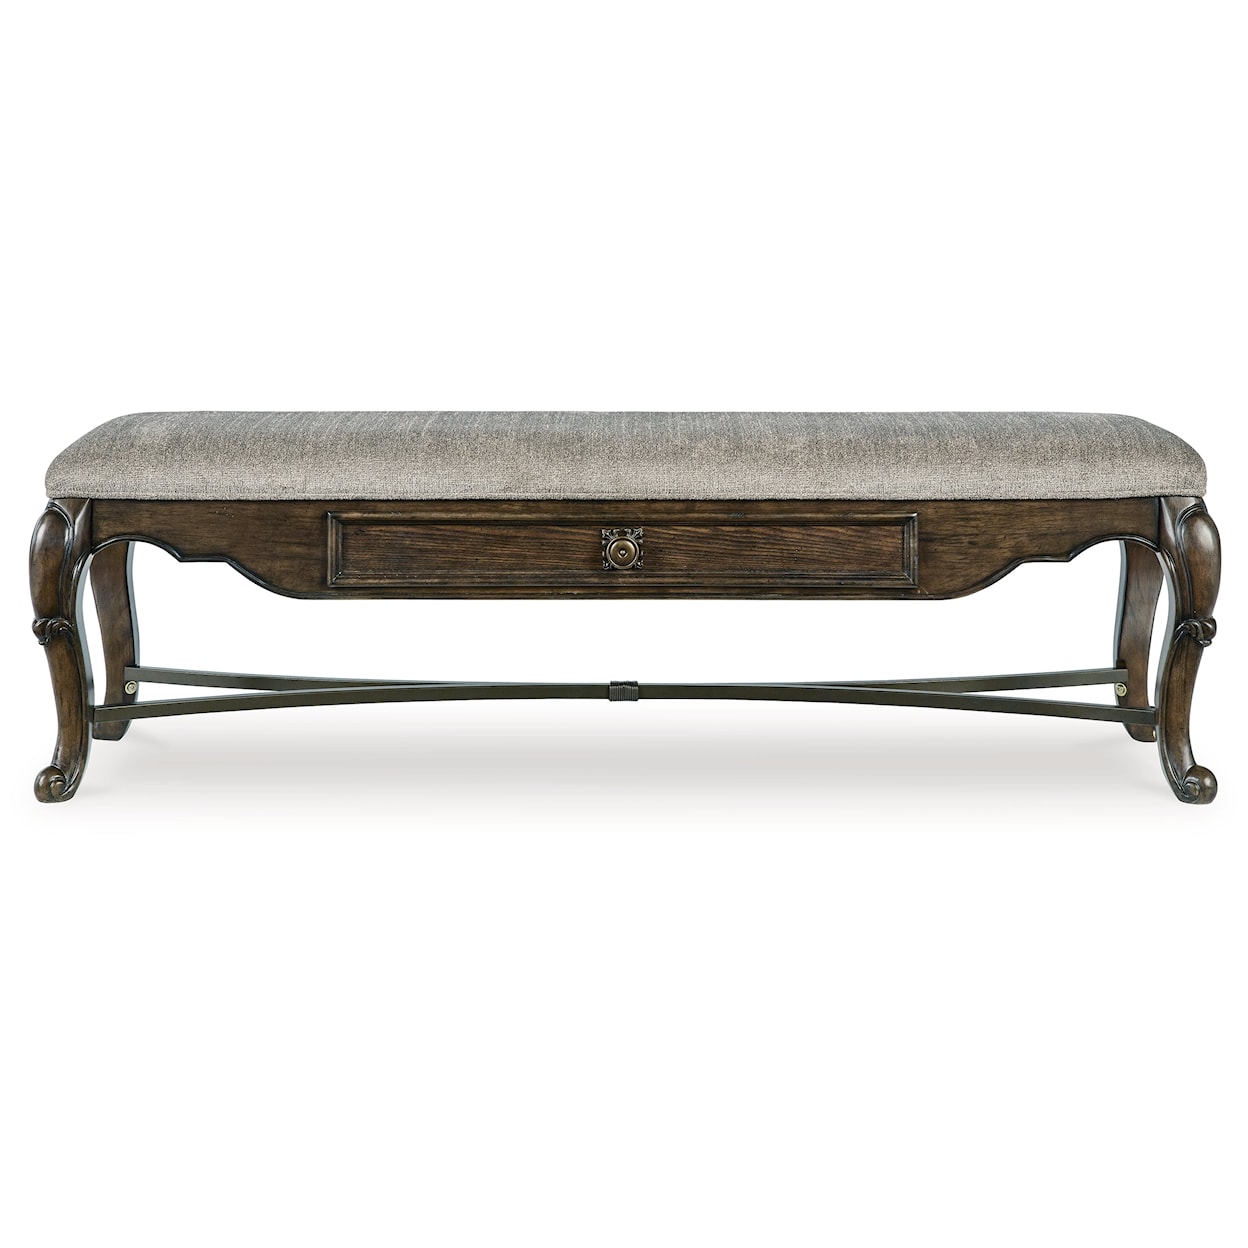 Michael Alan Select Maylee Upholstered Storage Bench